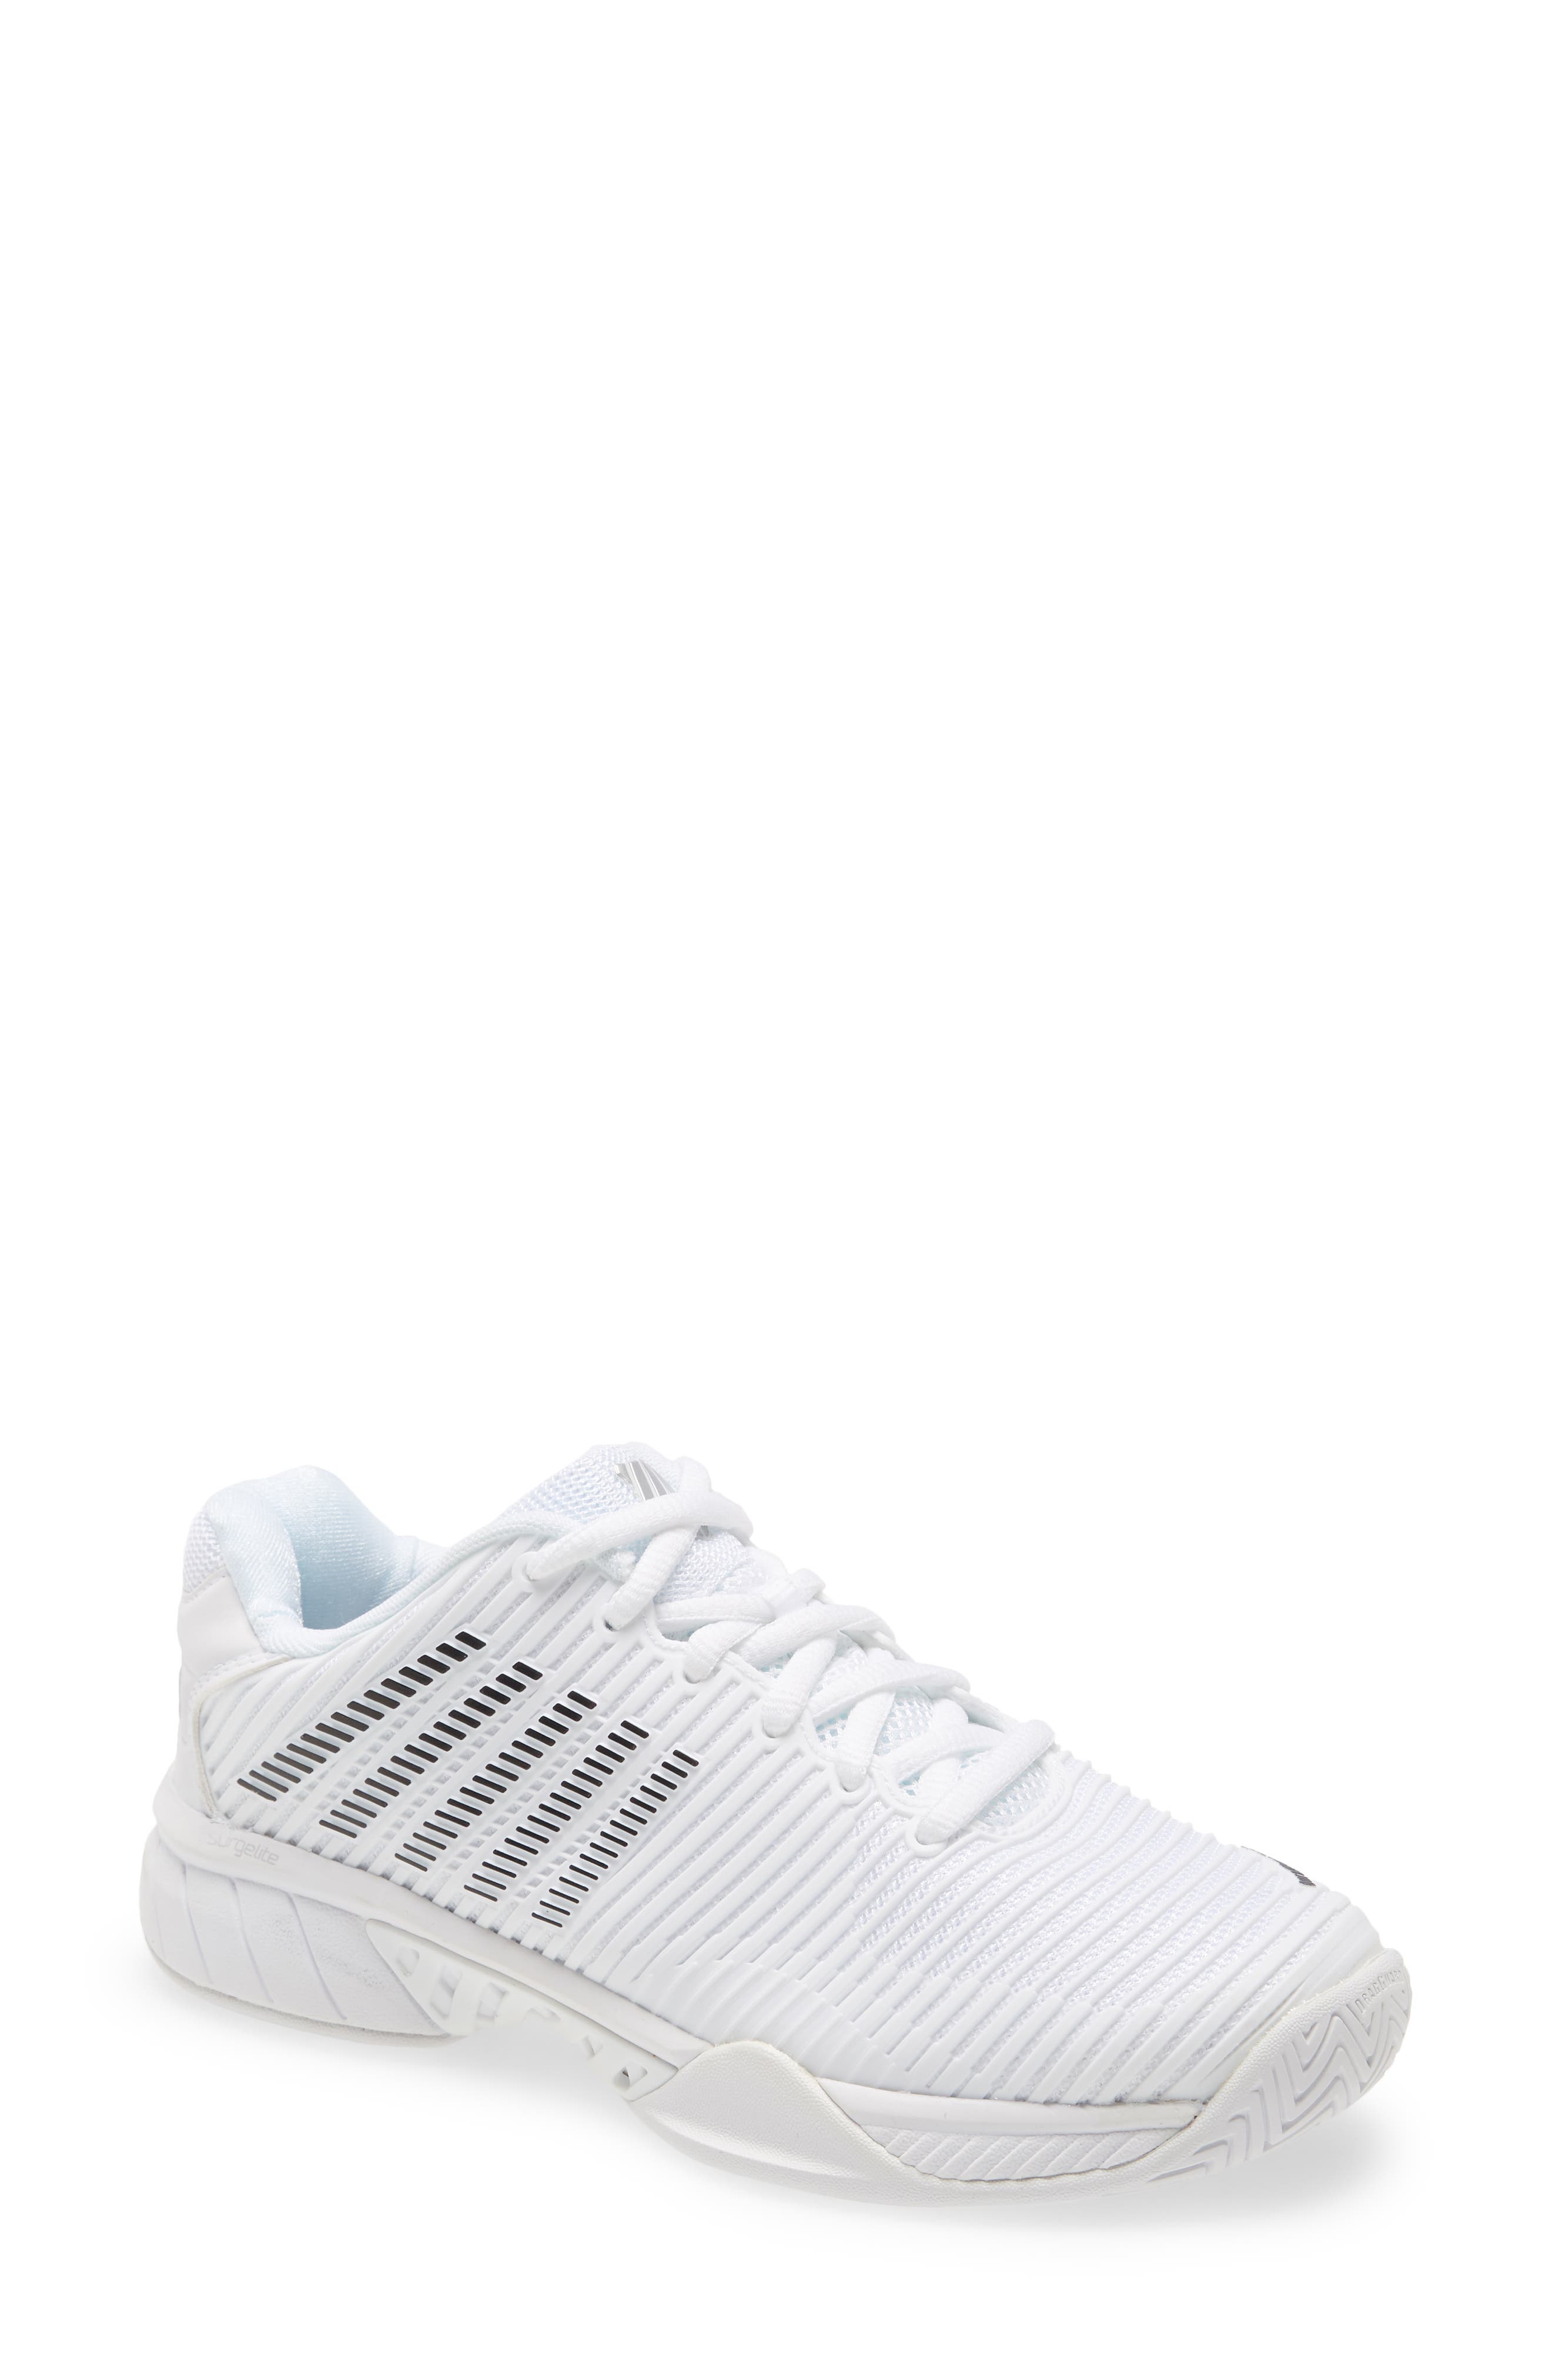 womens white sneakers nordstrom